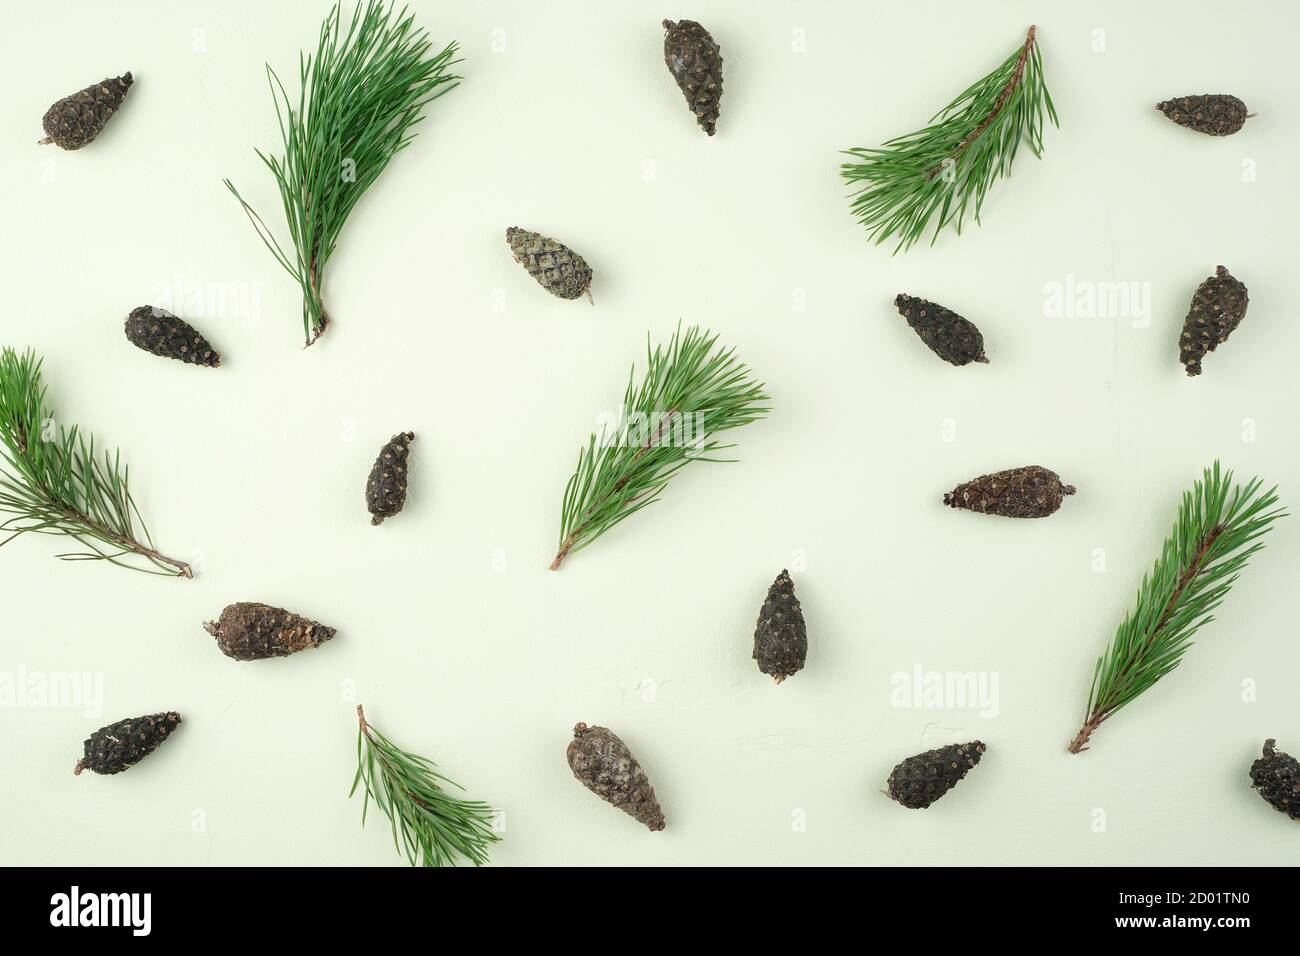 Many cones and pine branches are singly arranged on a light green background. Holiday background. Stock Photo